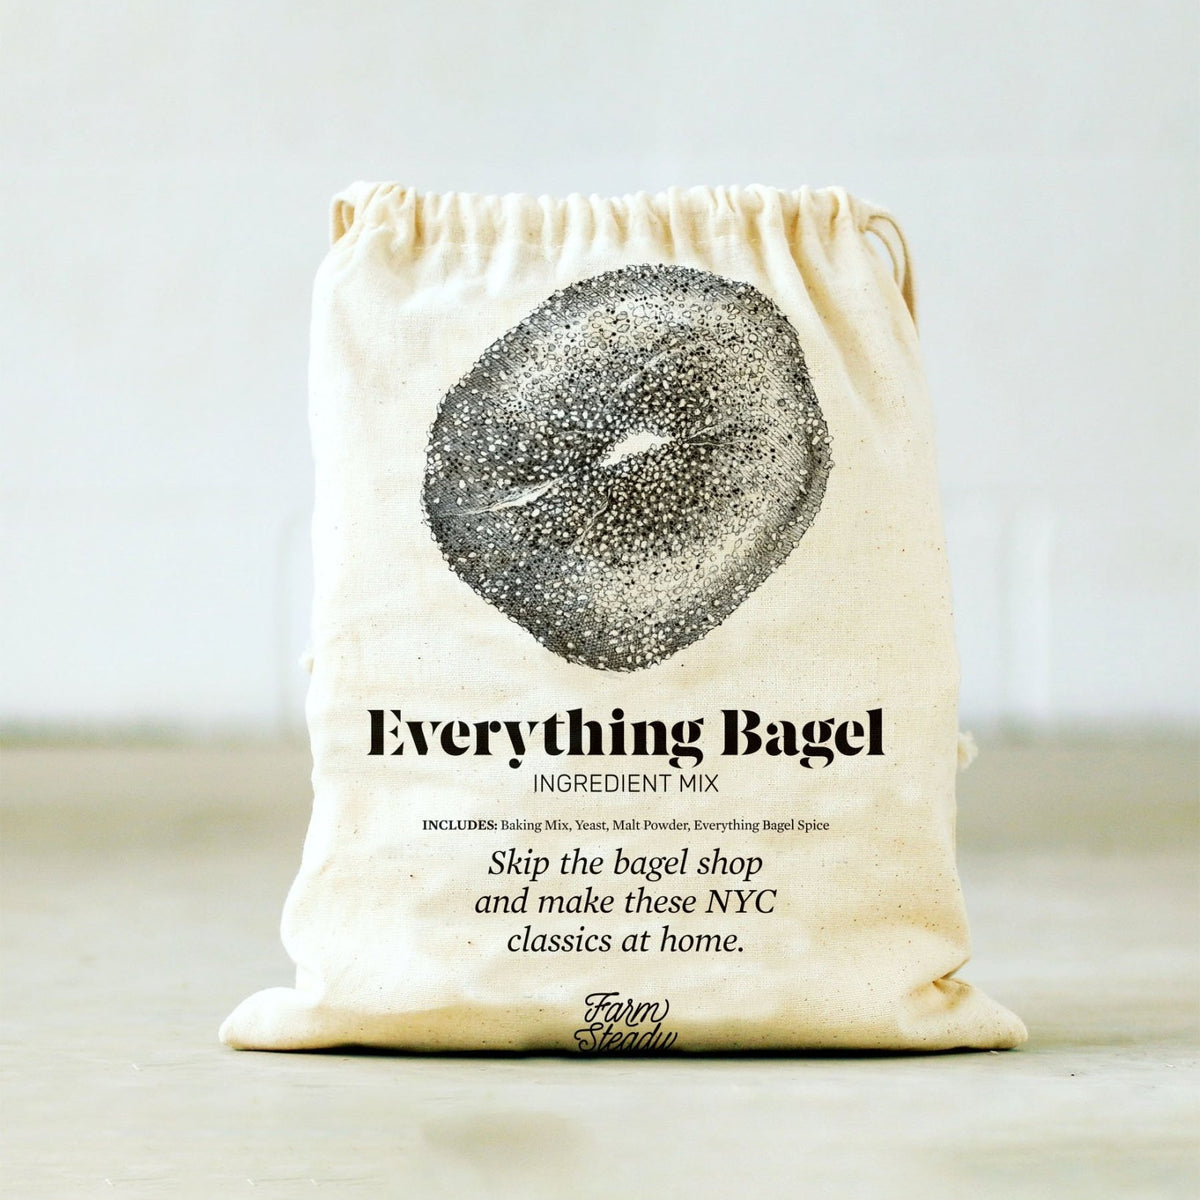 Farm Steady Everything Bagel and Cream Cheese Making Kit